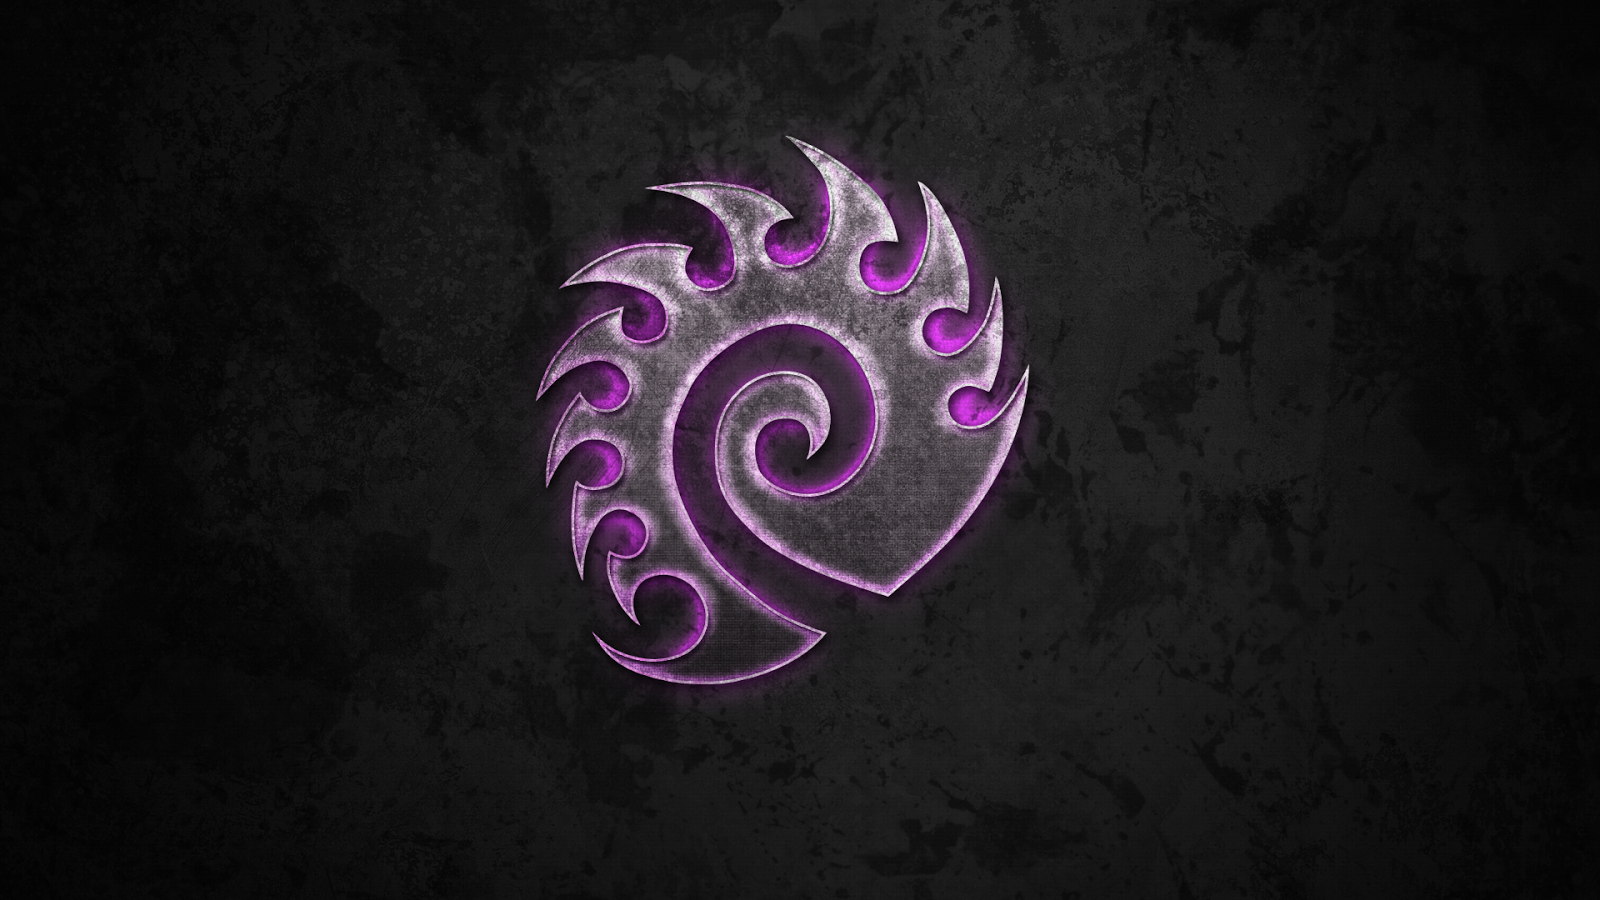 Image Starcraft Zerg Logo Pc Android iPhone And iPad Wallpaper